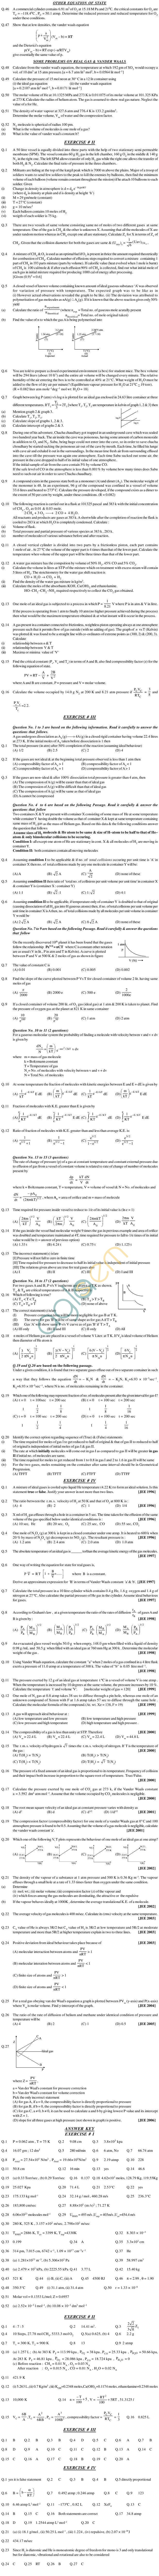 Chemistry Study Material - Chapter 5